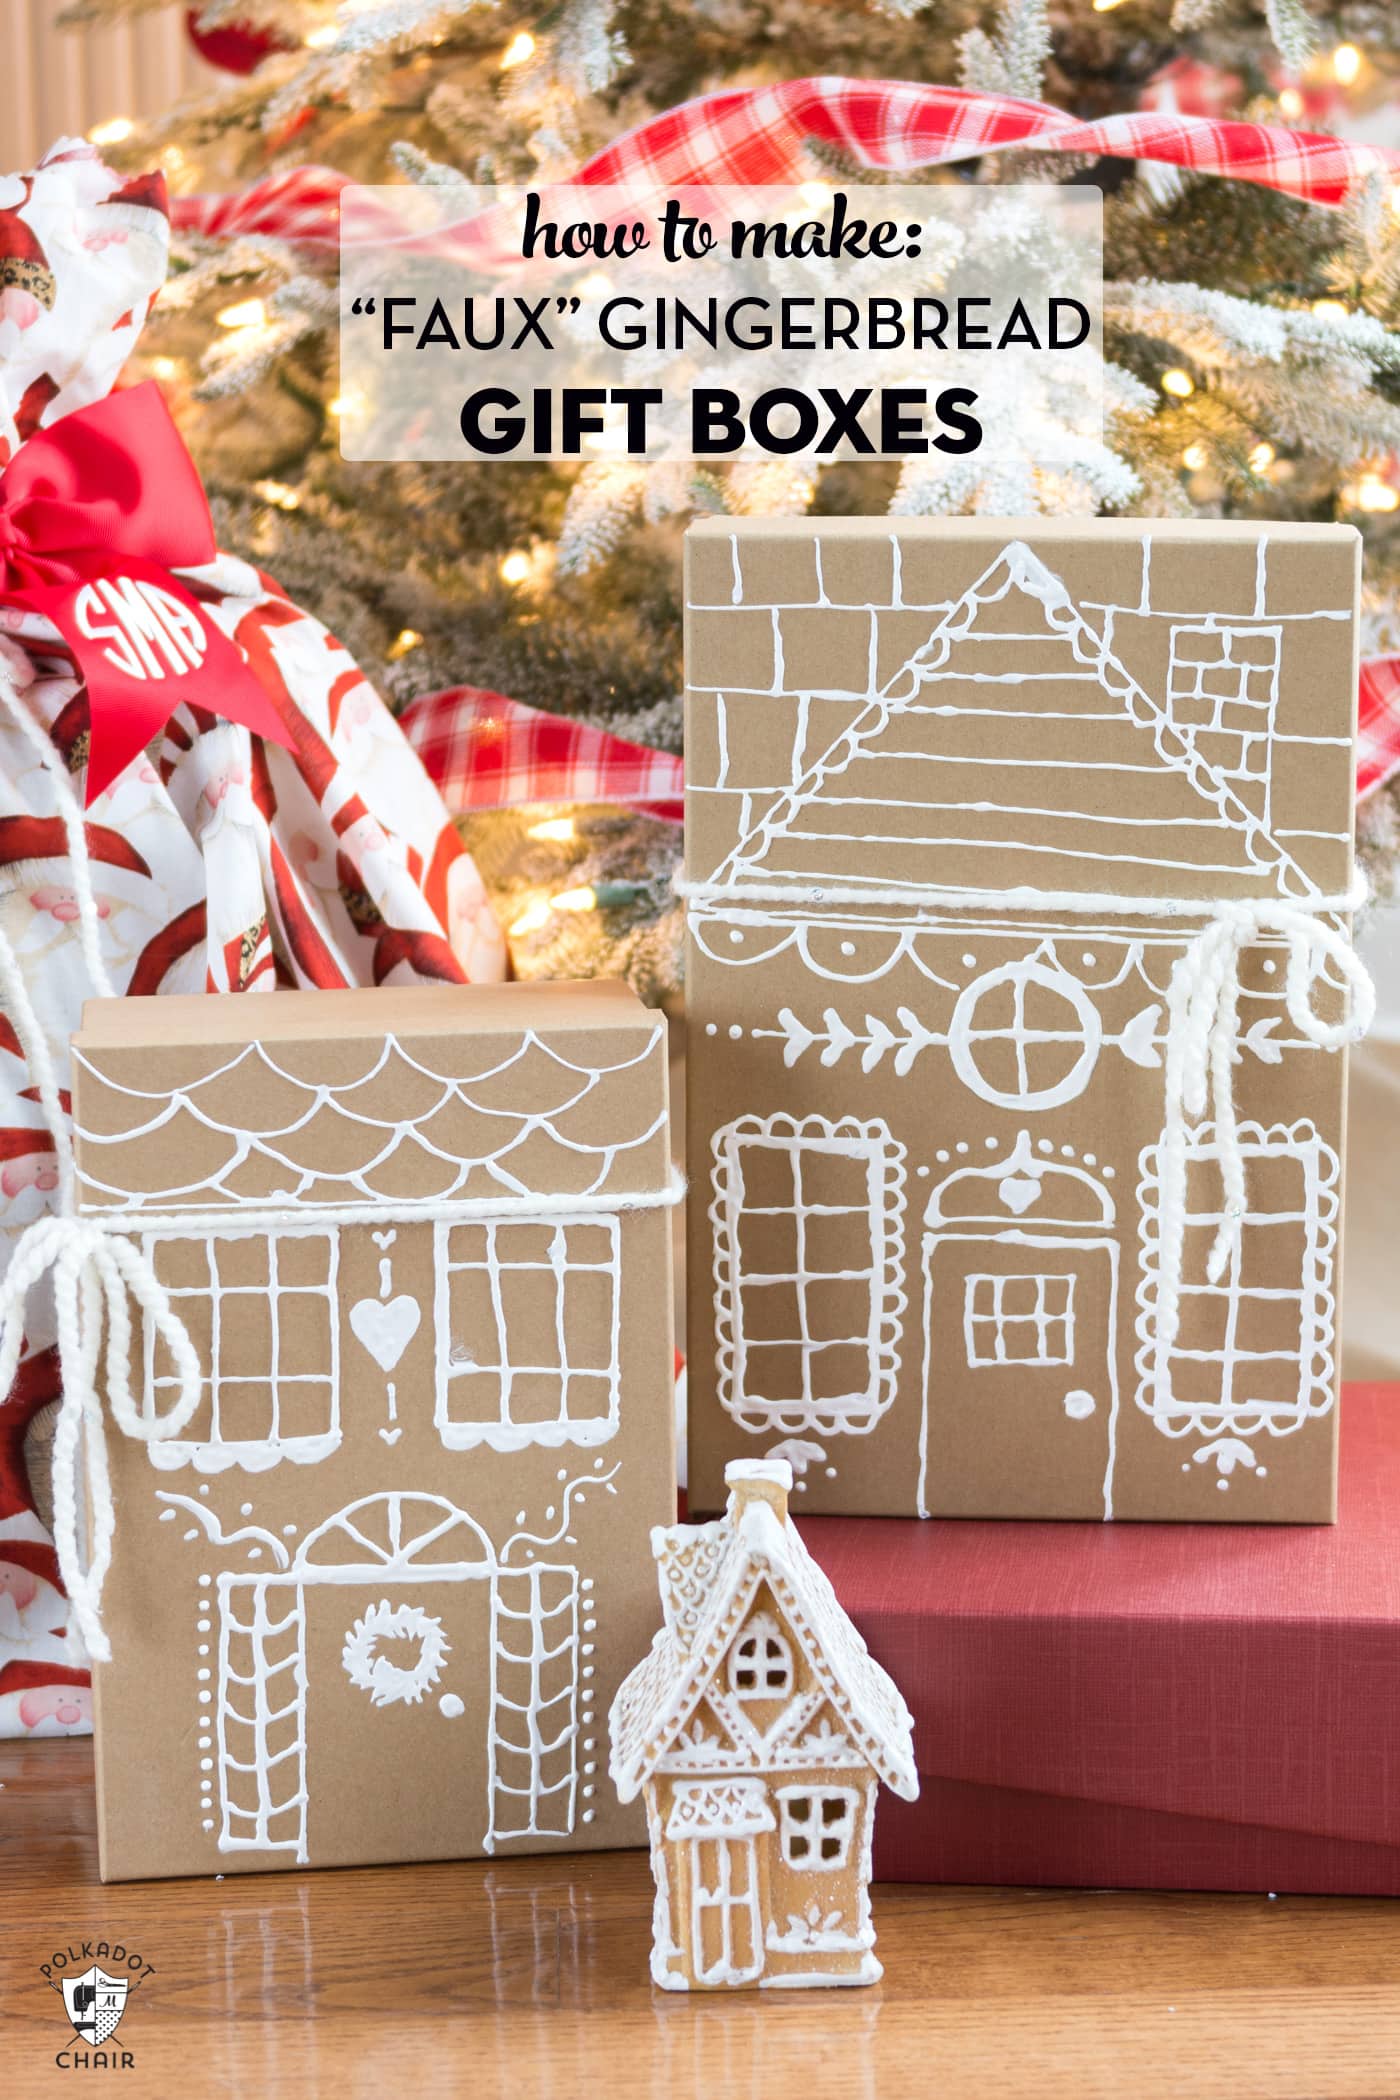 DIY Gingerbread house gift boxes